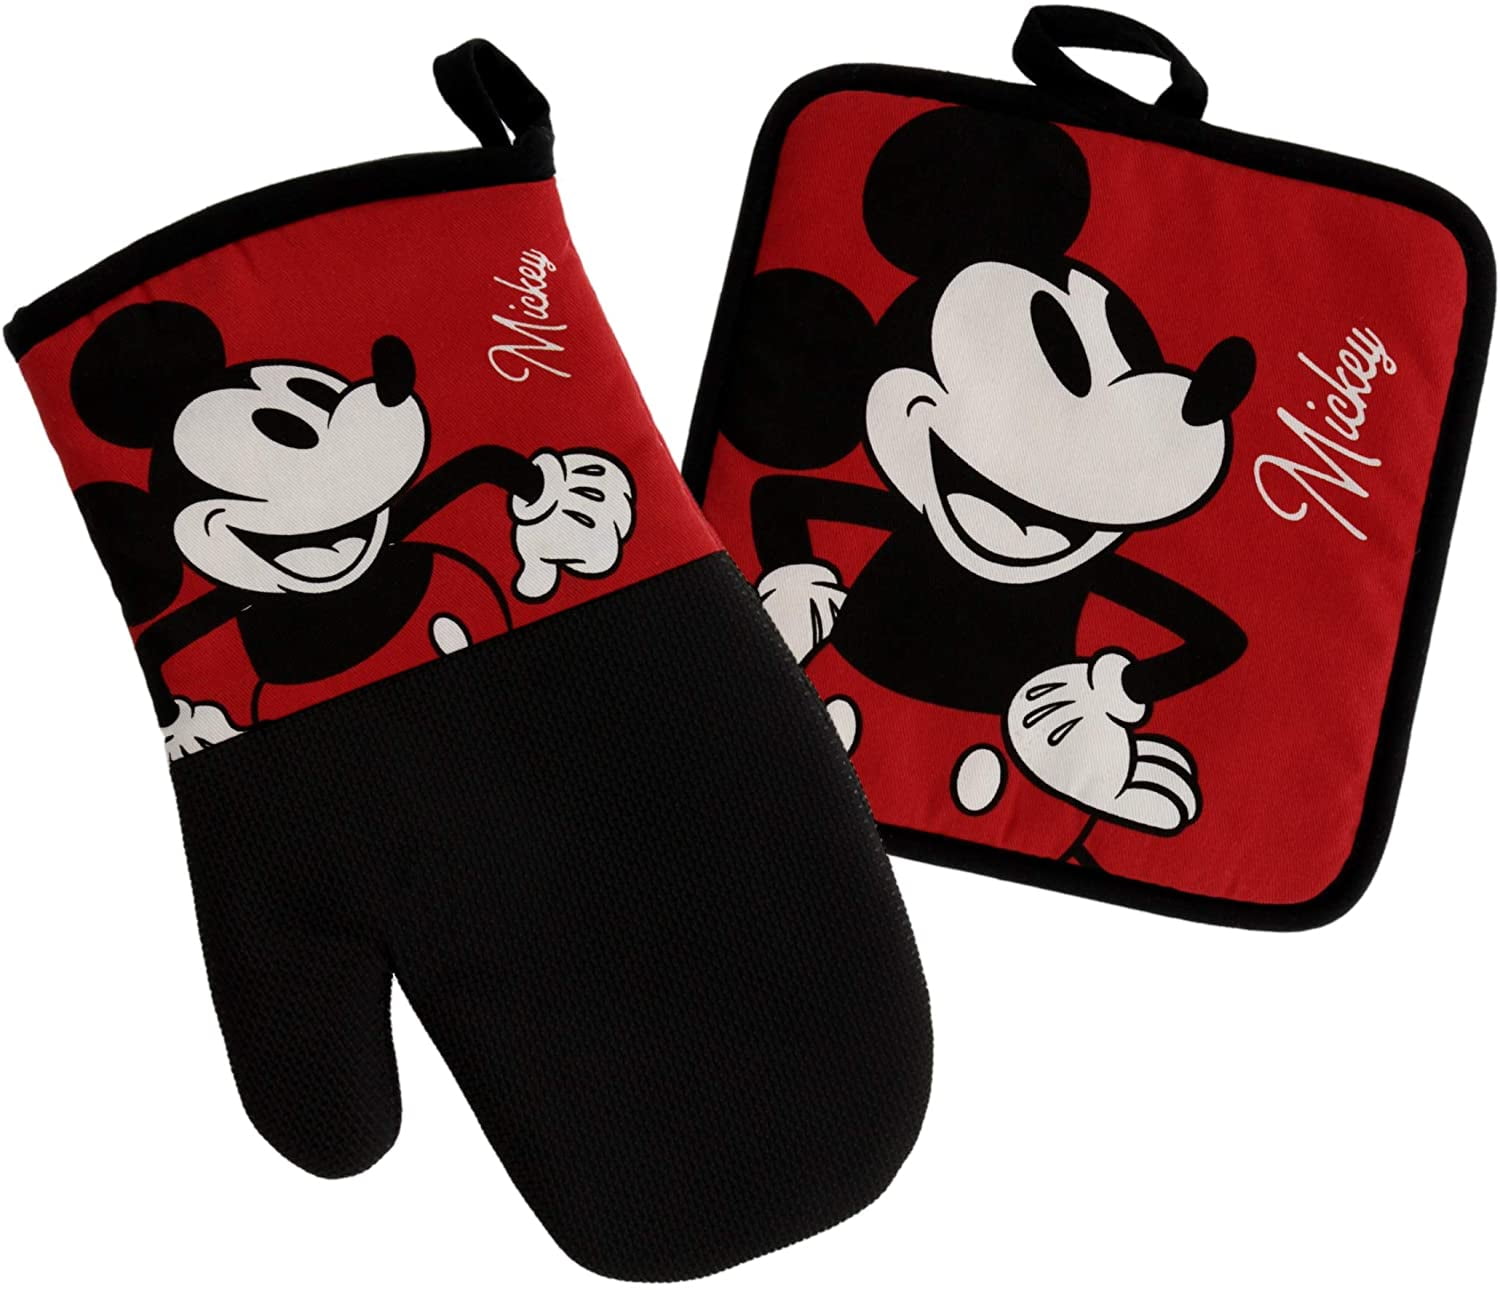 Details about   Disney Mickey Mouse 2-pk Mini Oven Mitts Mickey and minnie  authentic new nice